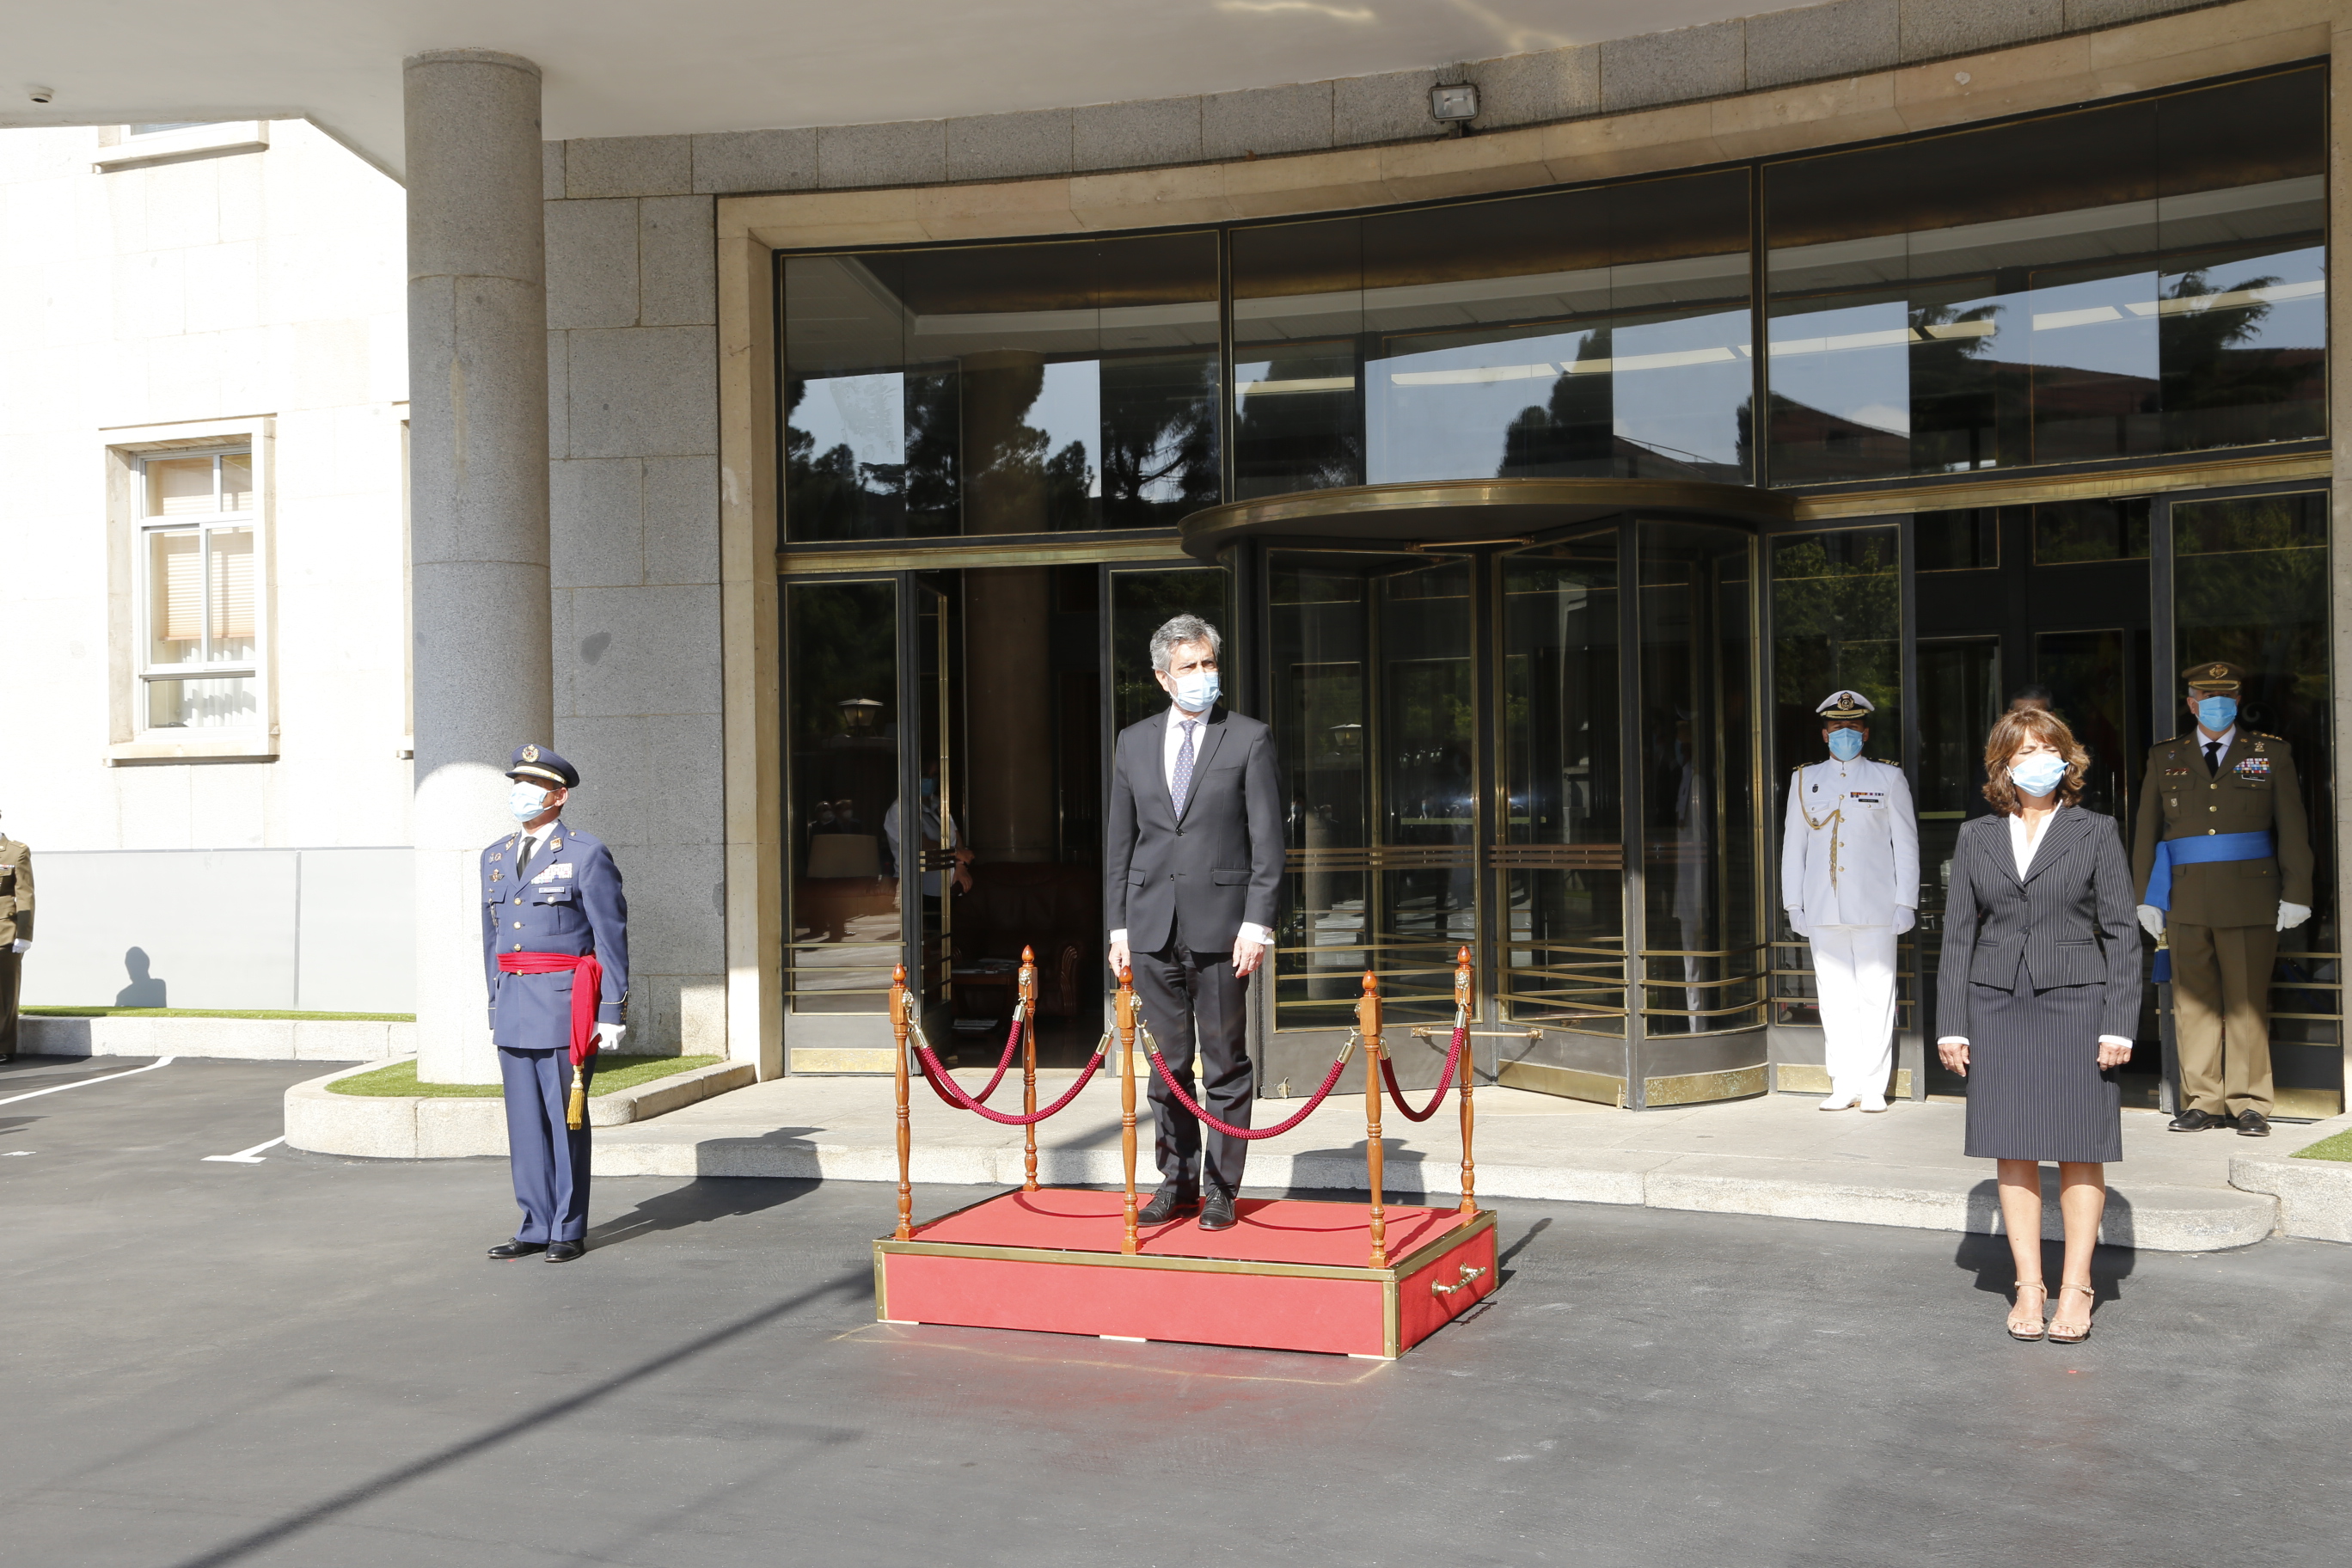 Solemn flag raising ceremony honoring the sixth Anniversary of the Proclamation of H.M. King Felipe VI